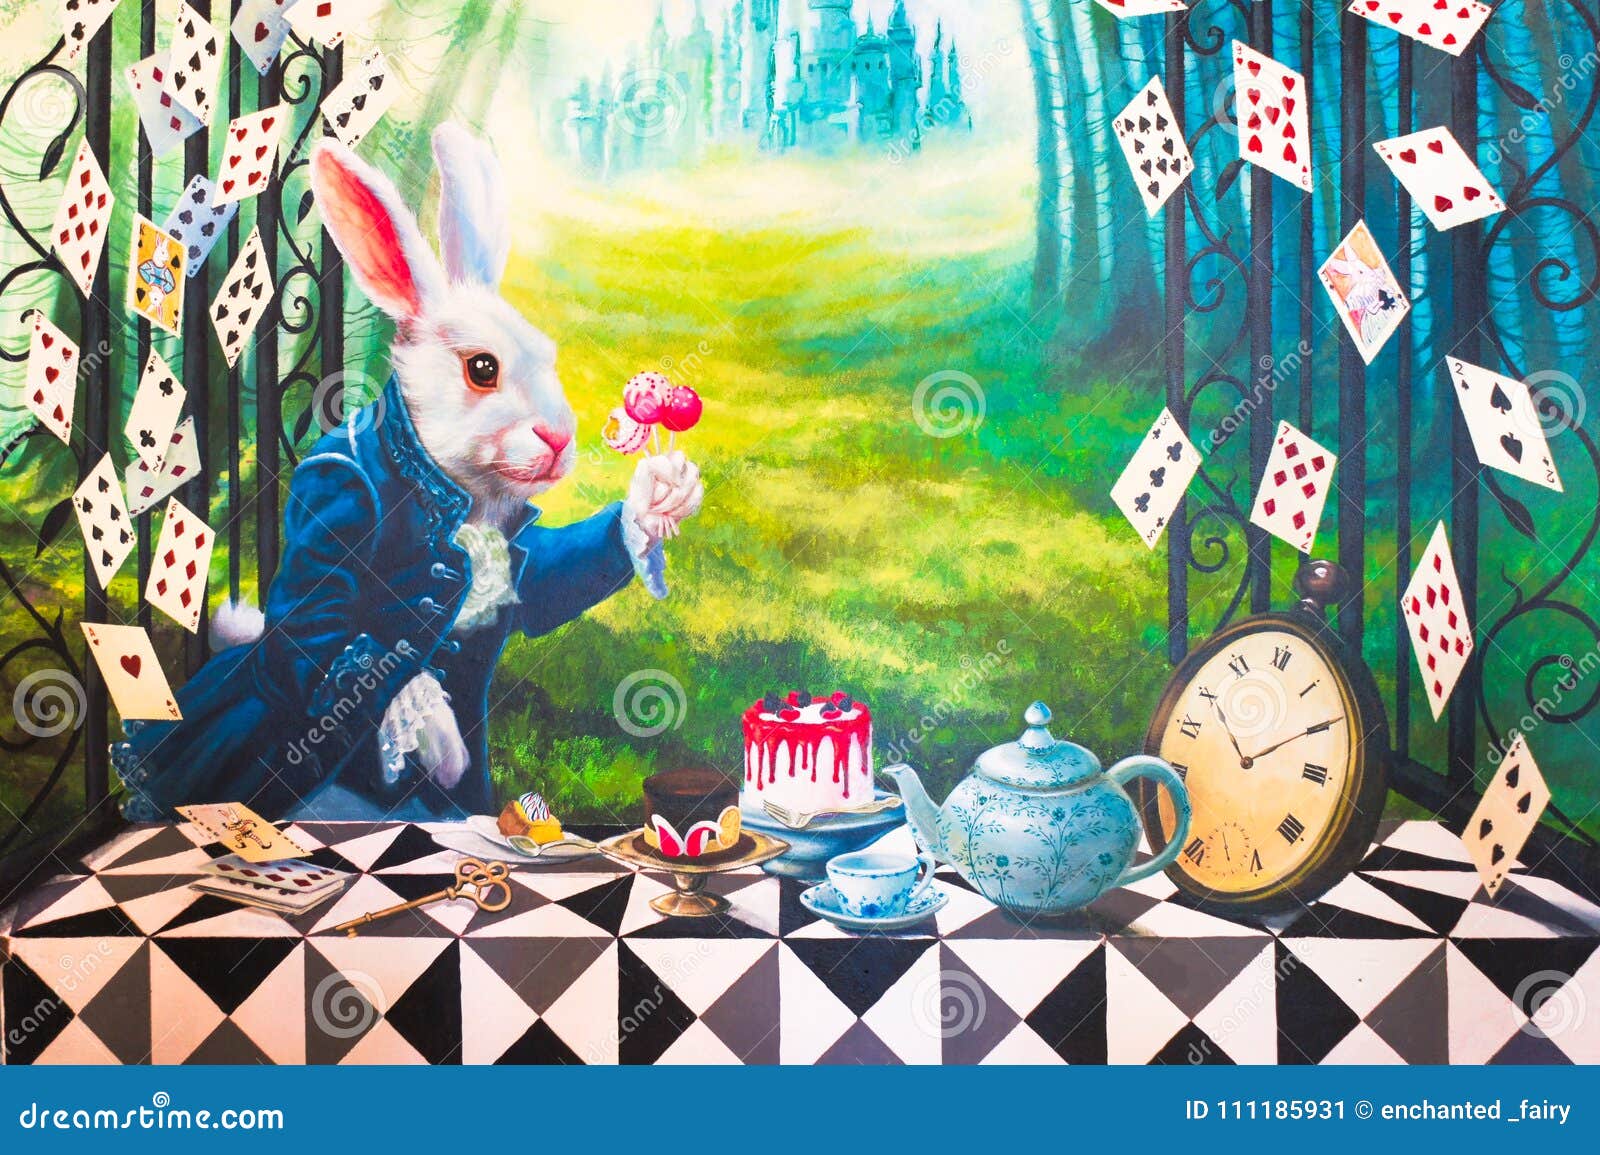 Wall Painting Of A White Rabbit Is Having A Tea Party Editorial Photo Image Of Cake Eggs